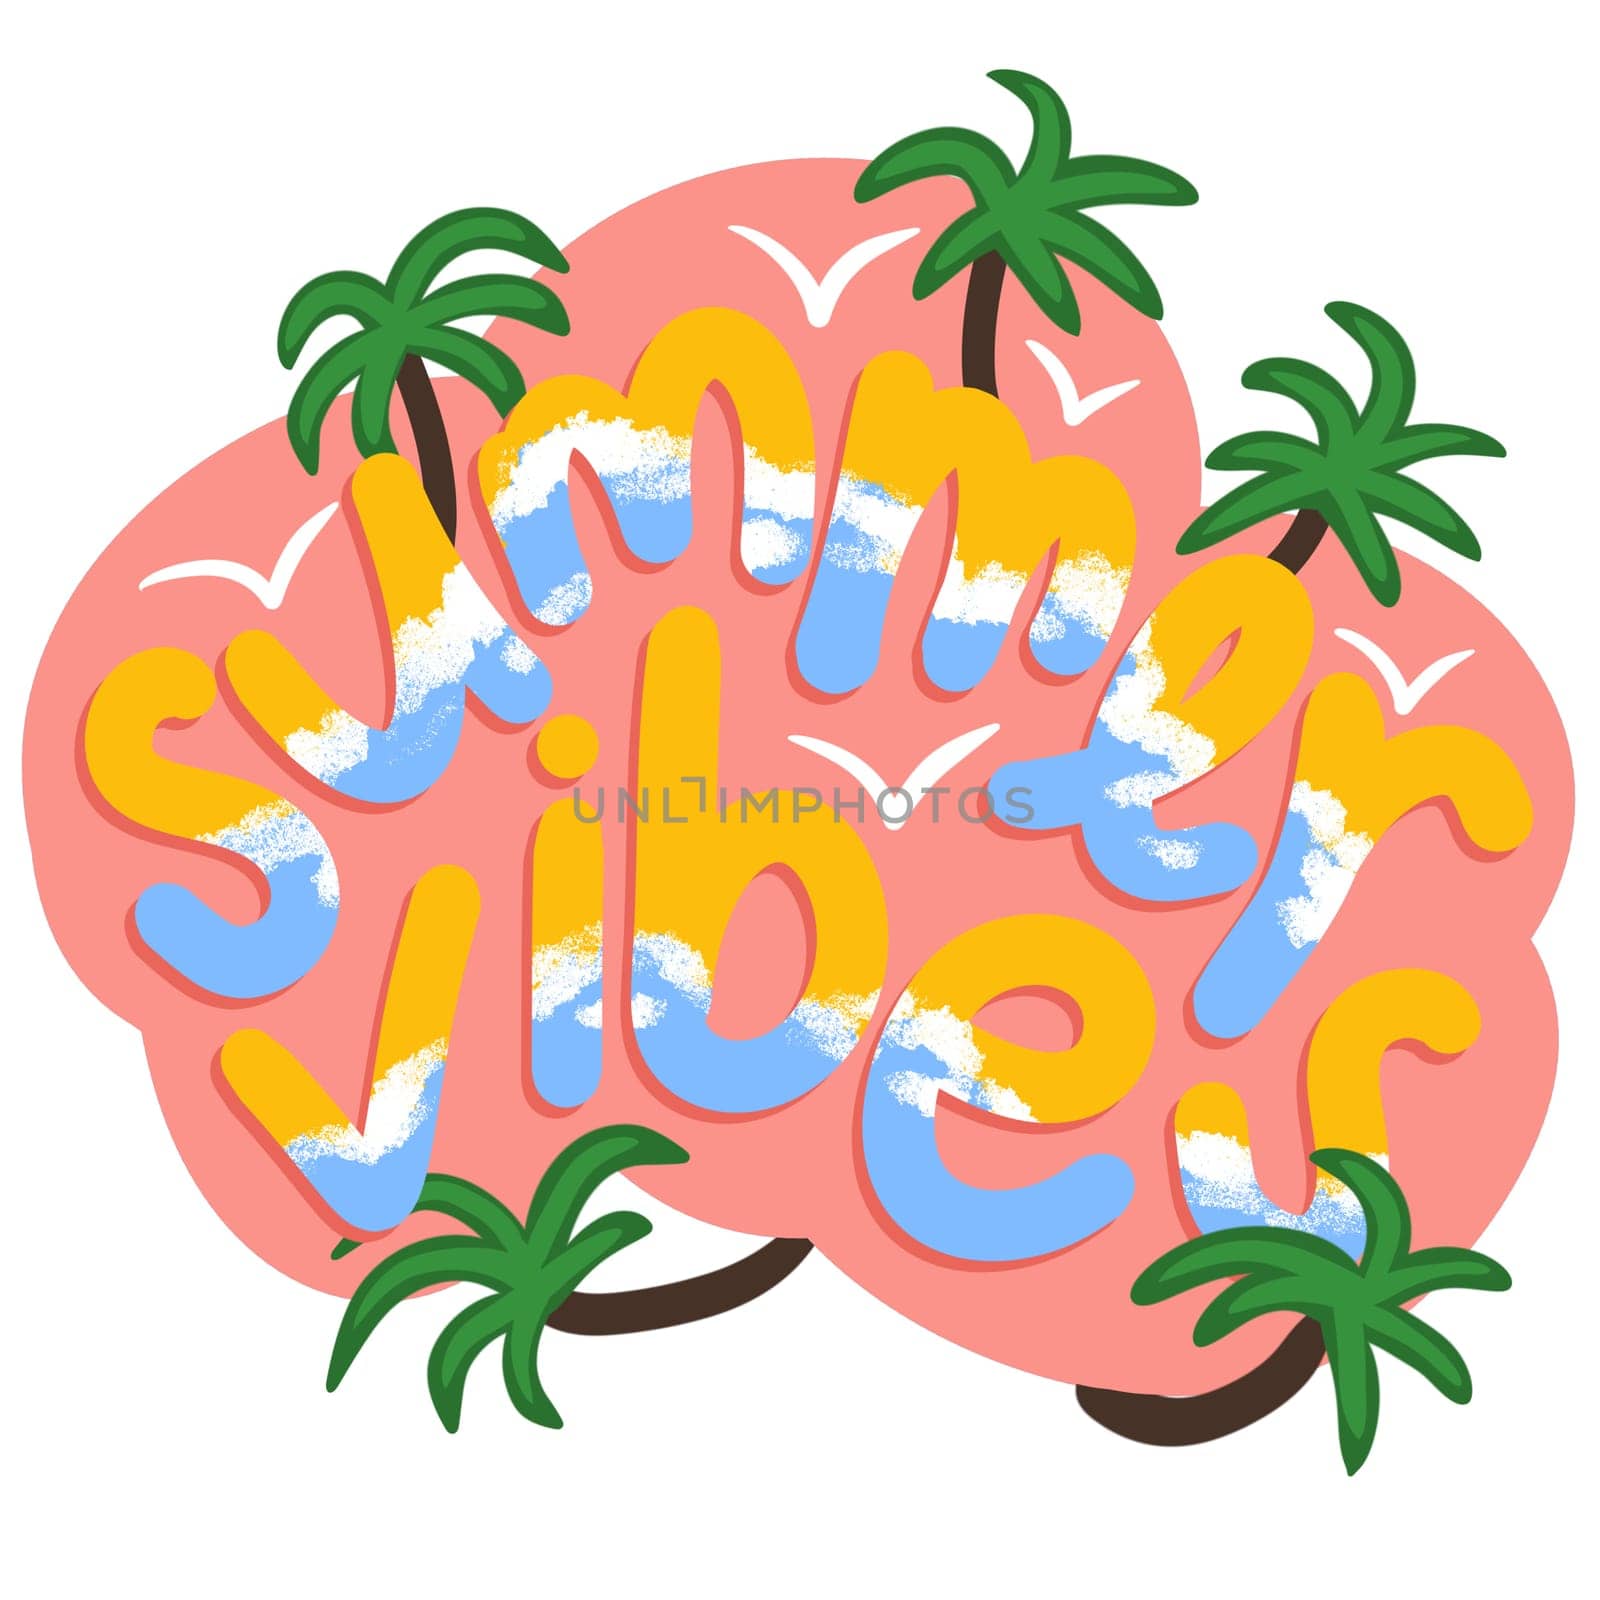 Summer vibes hand drawn illustration sticker. Sea ocean beach vacation holiday, peach palms tourism relax text words slogan lettering typography, bright colorful design